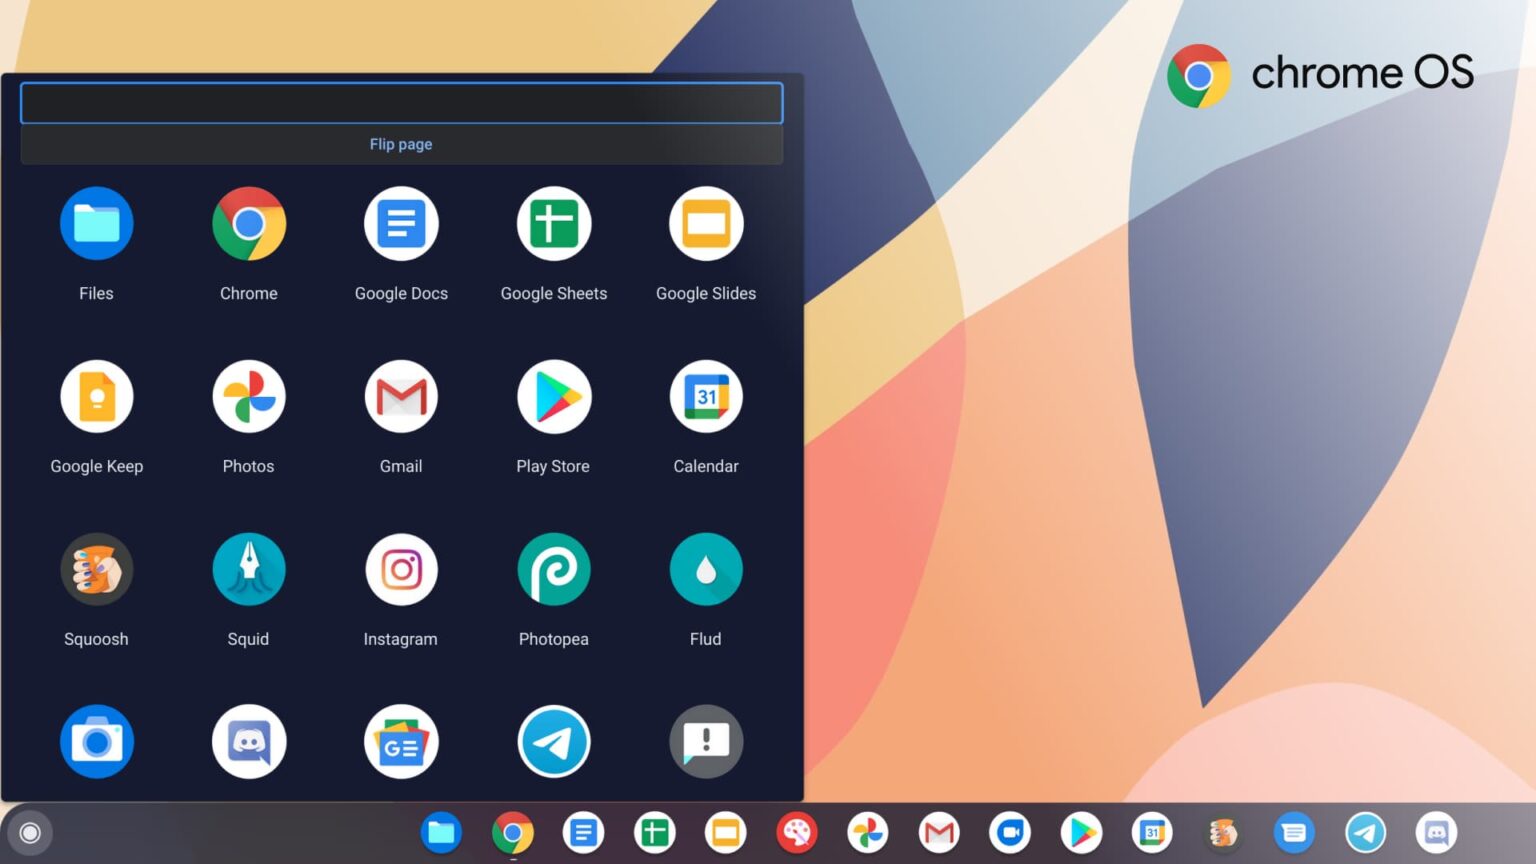 online sketchpad apps for chrome os